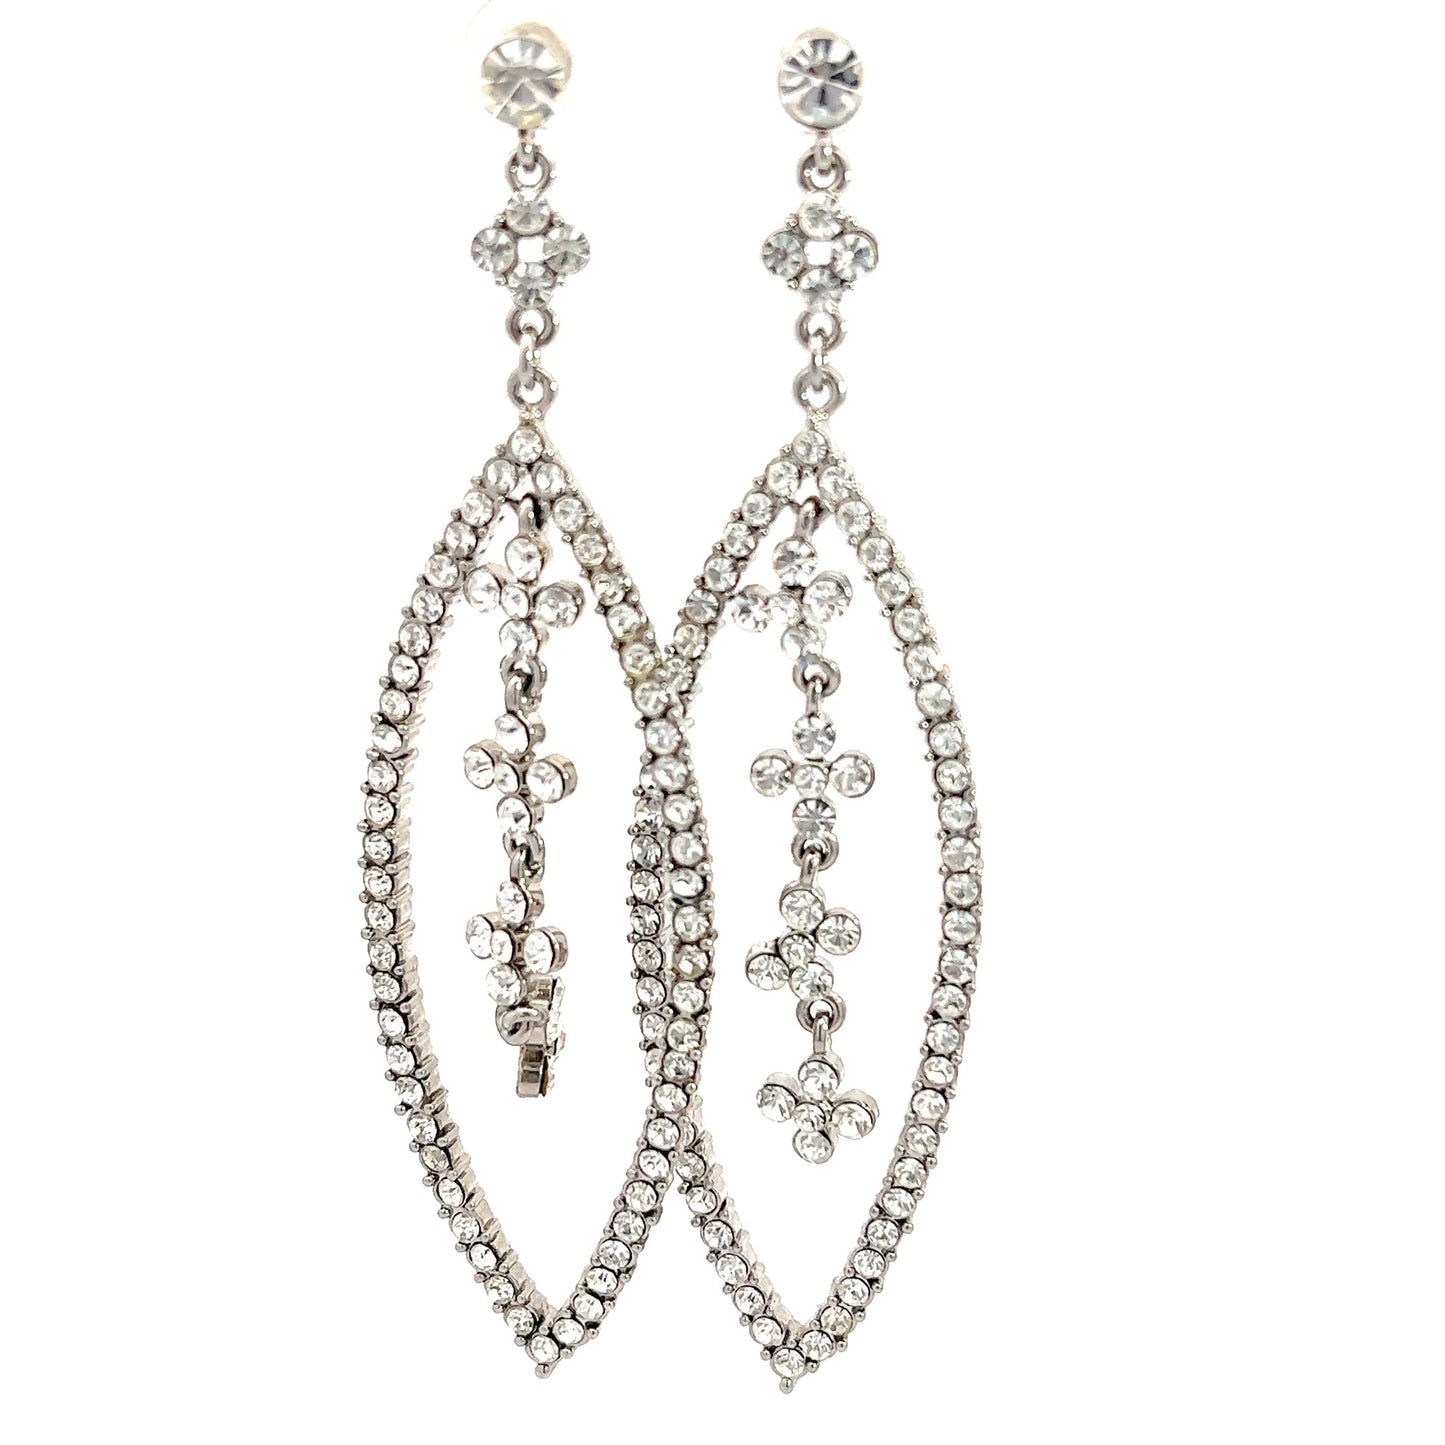 Crystal Drop Earrings - Born To Glam